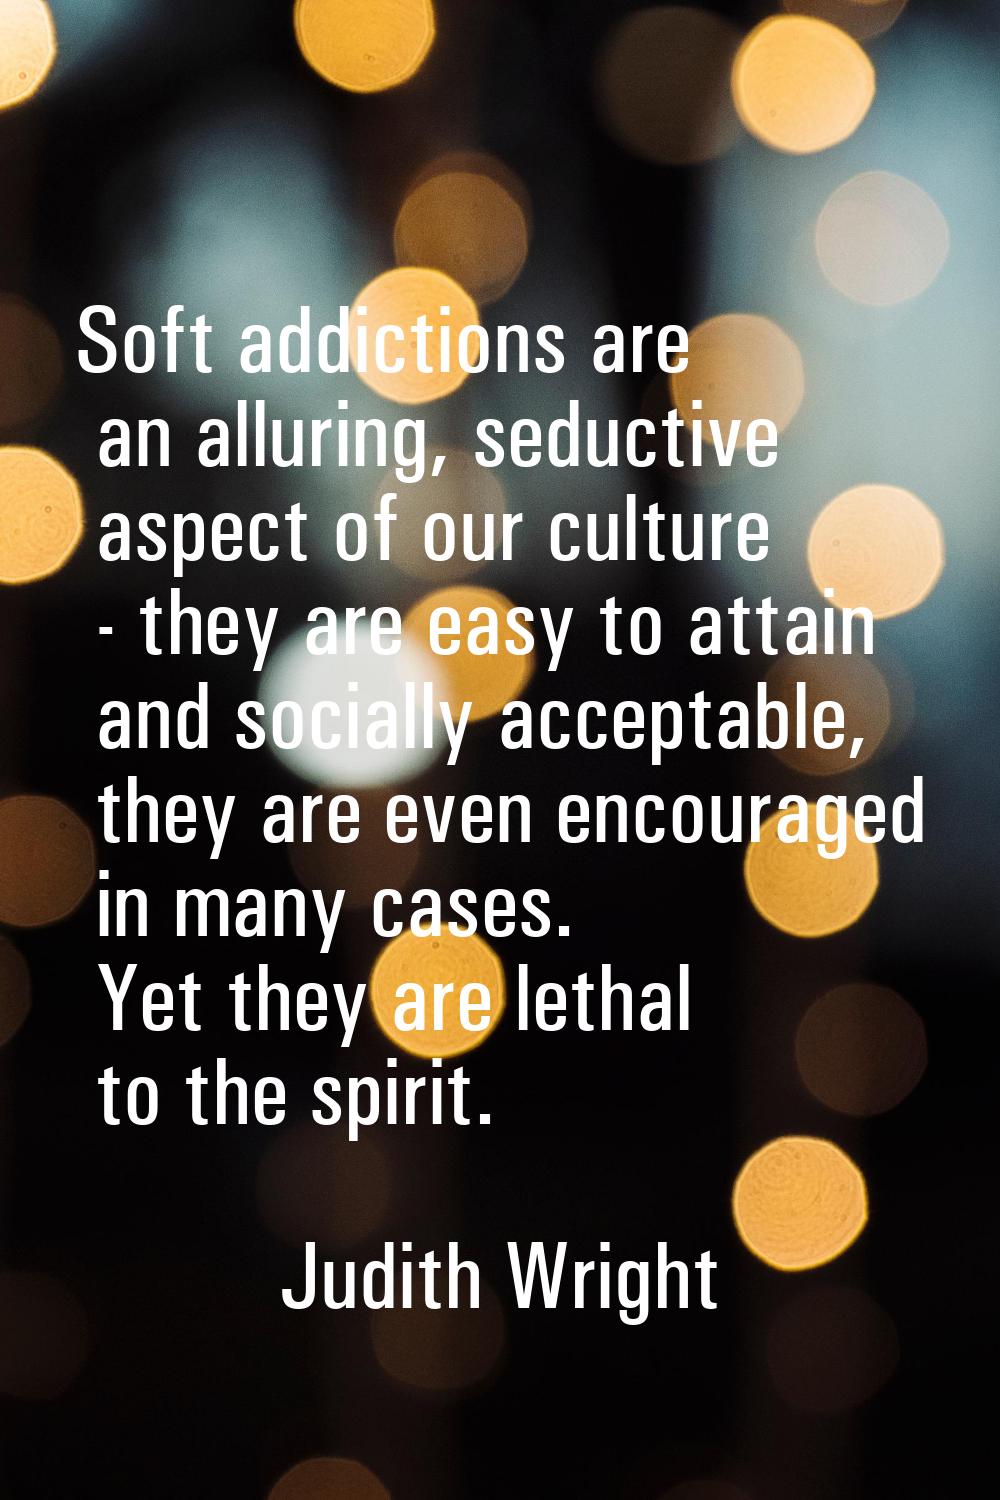 Soft addictions are an alluring, seductive aspect of our culture - they are easy to attain and soci